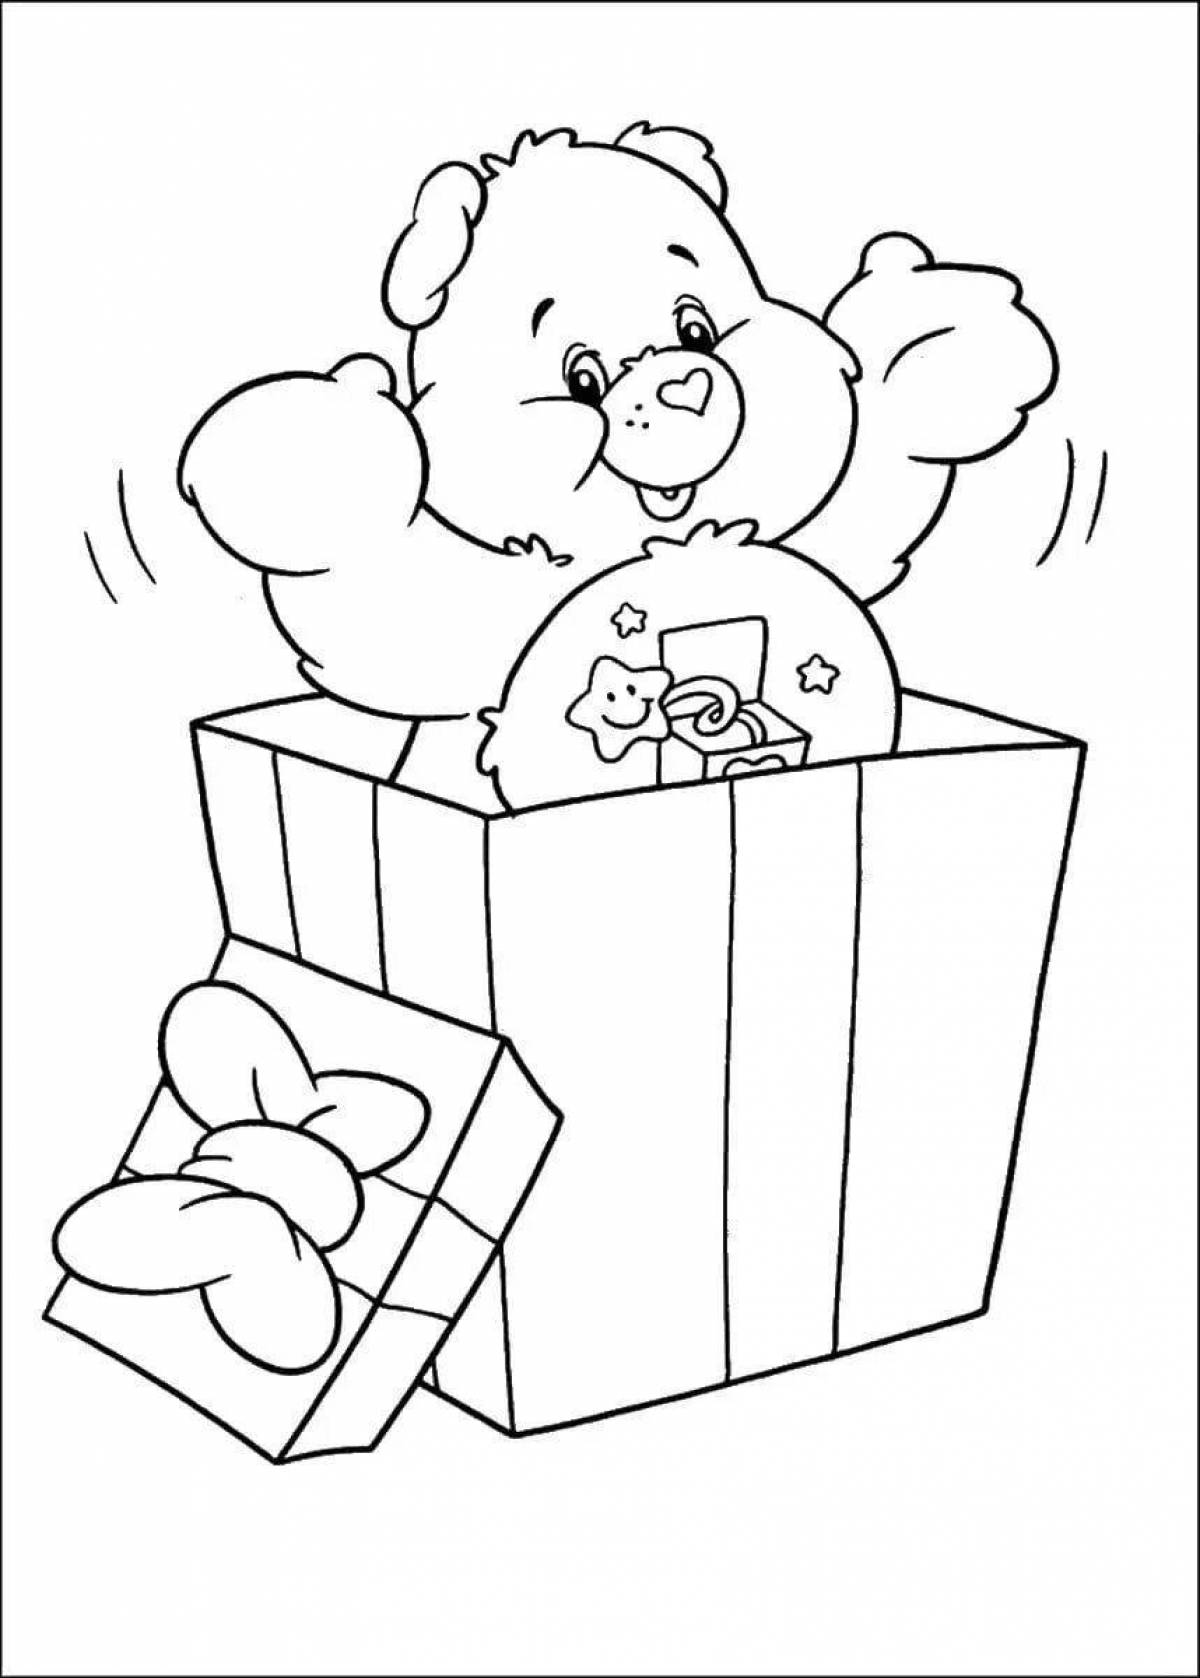 Adorable bear with a gift coloring book